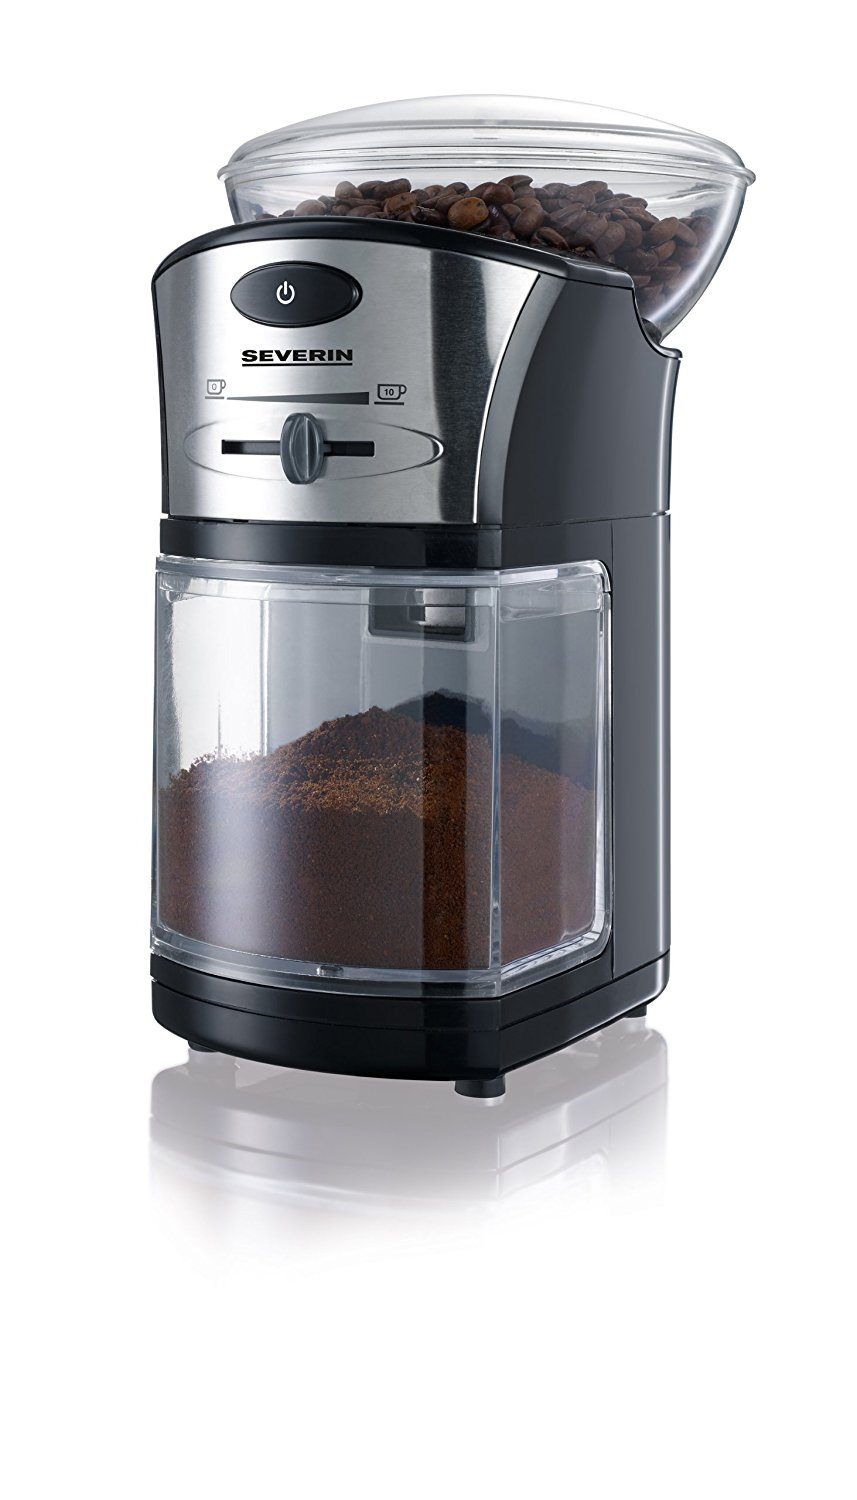 Severin Coffee Grinder Review